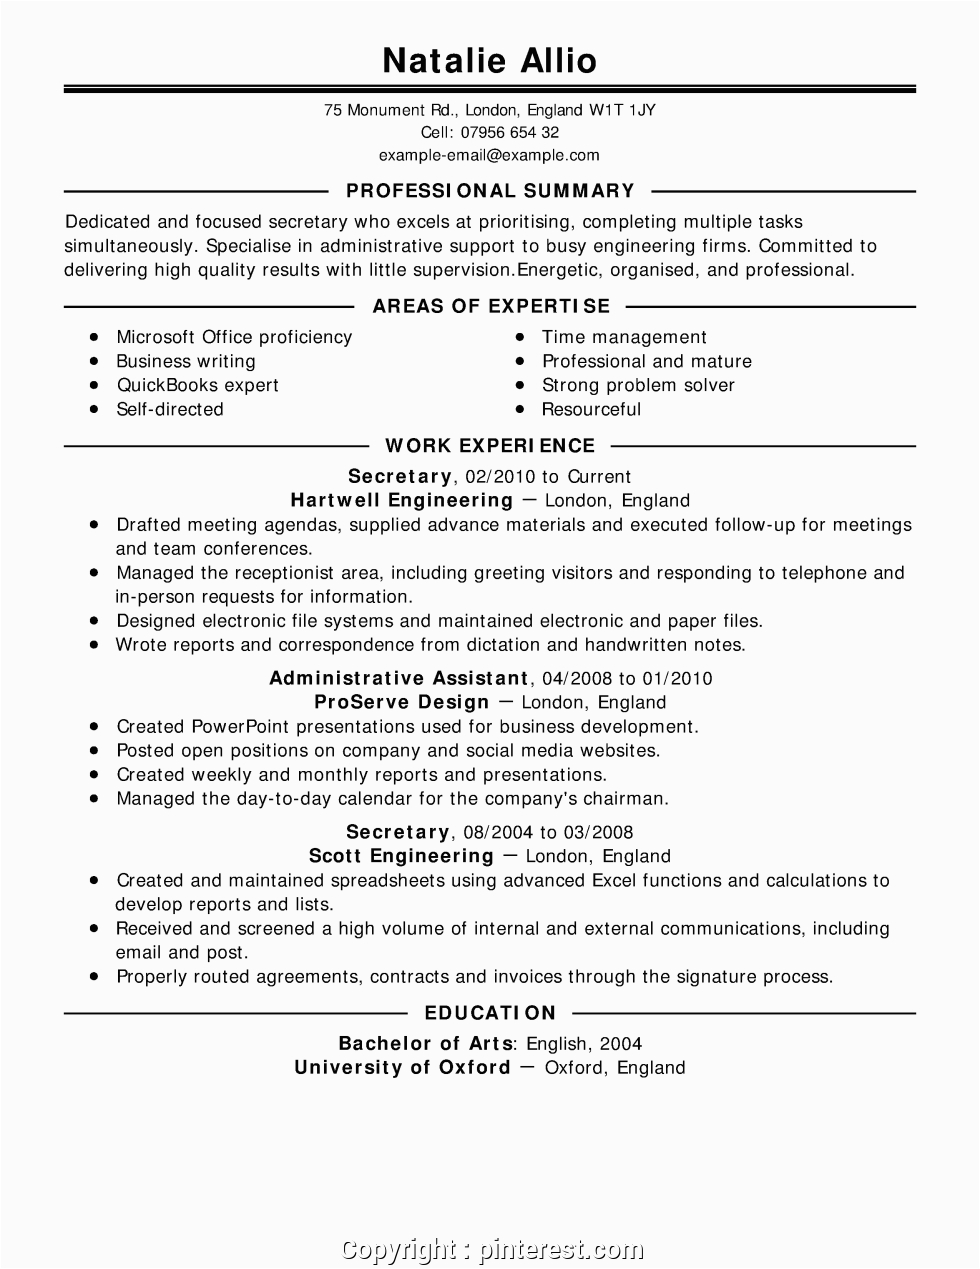 Area Of Expertise Samples for Resume Professional Cv areas Expertise Examples Choose From